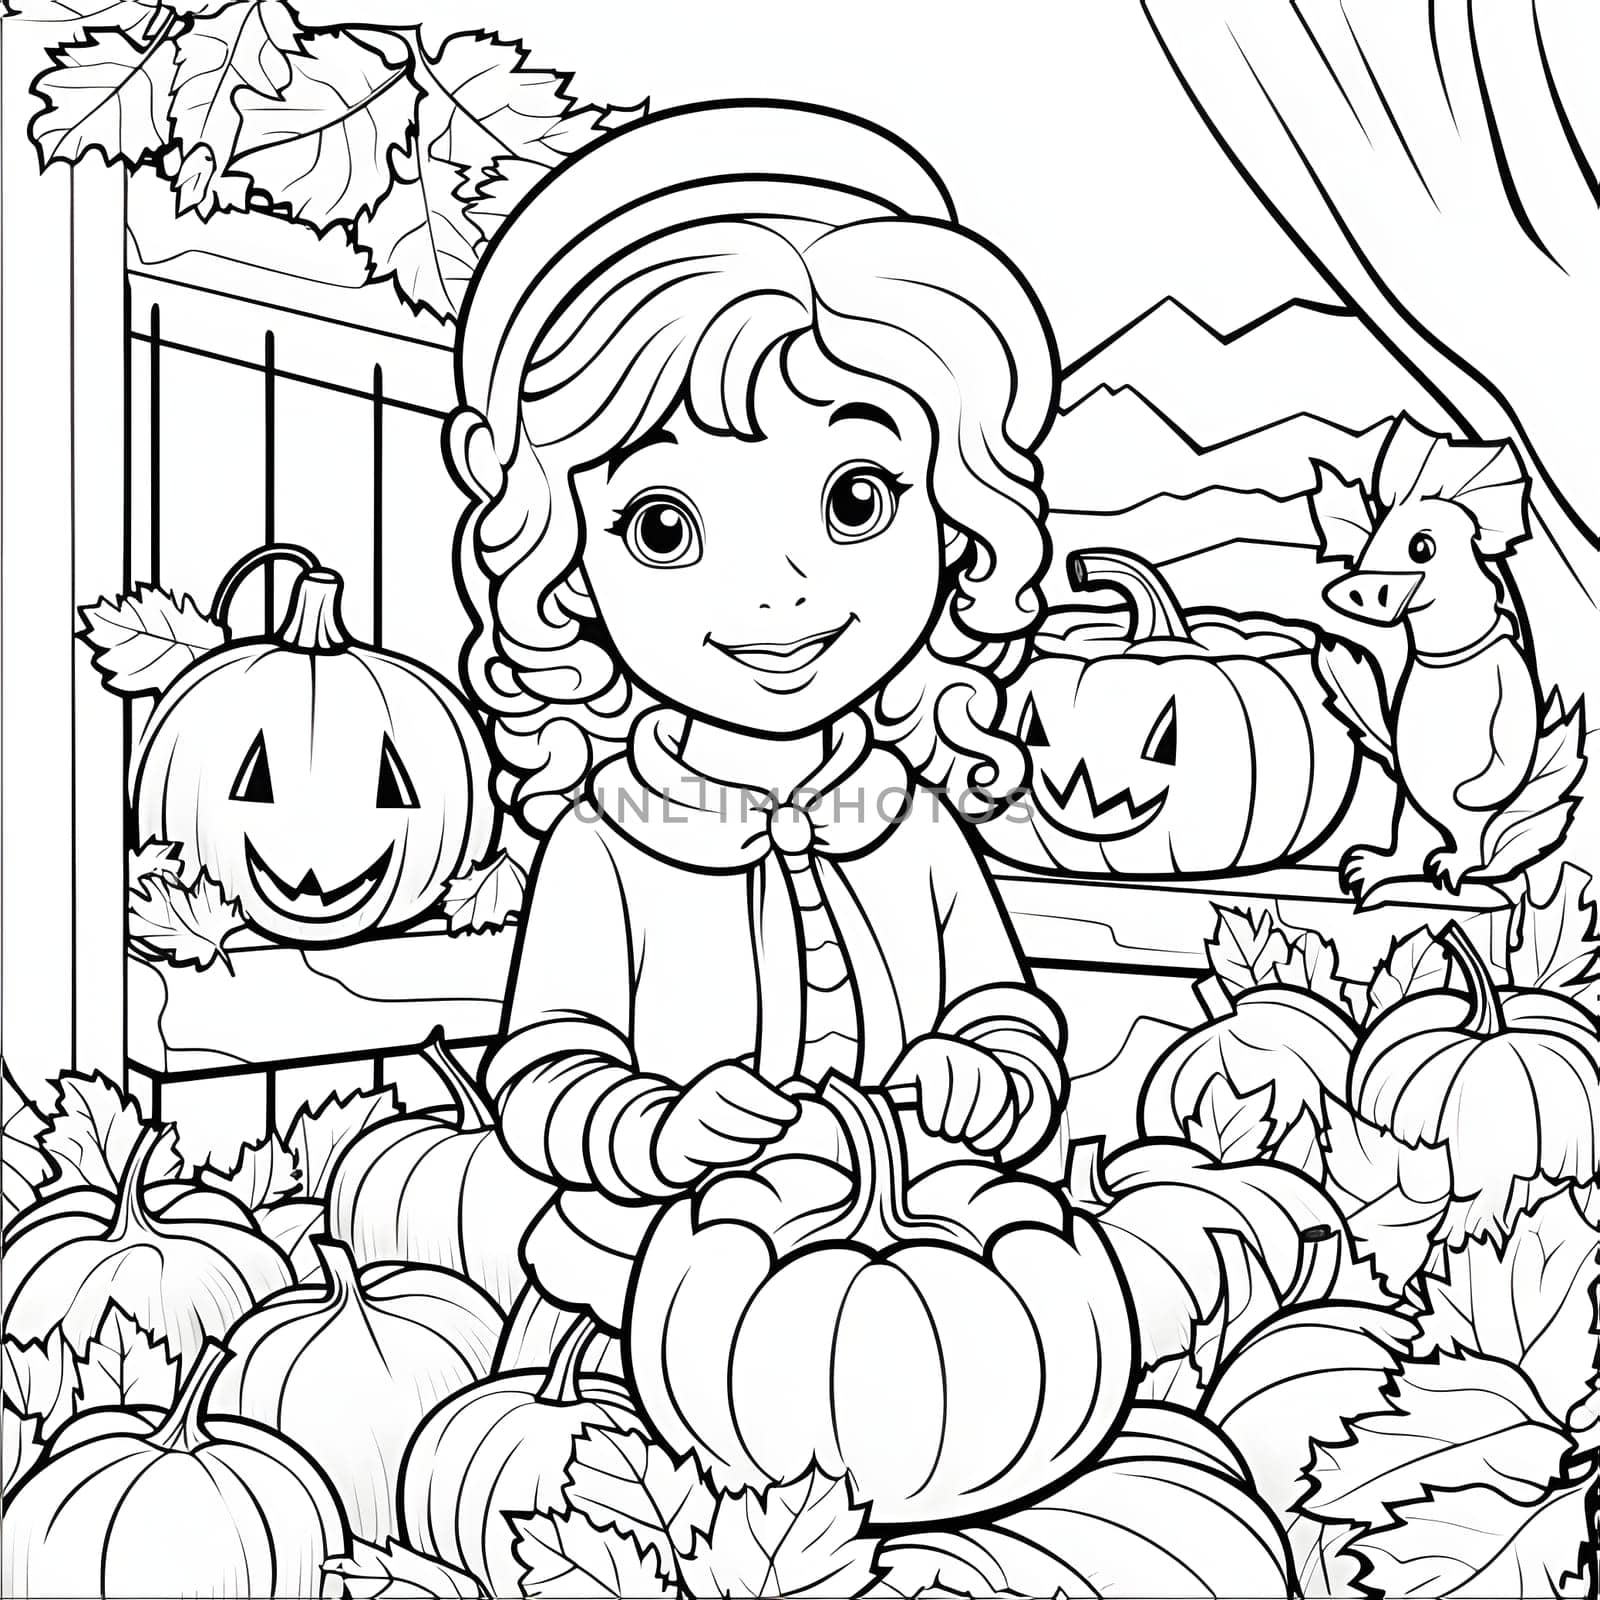 Black and white coloring card of a cheerful girl with a pumpkin. Pumpkin as a dish of thanksgiving for the harvest, picture on a white isolated background. by ThemesS